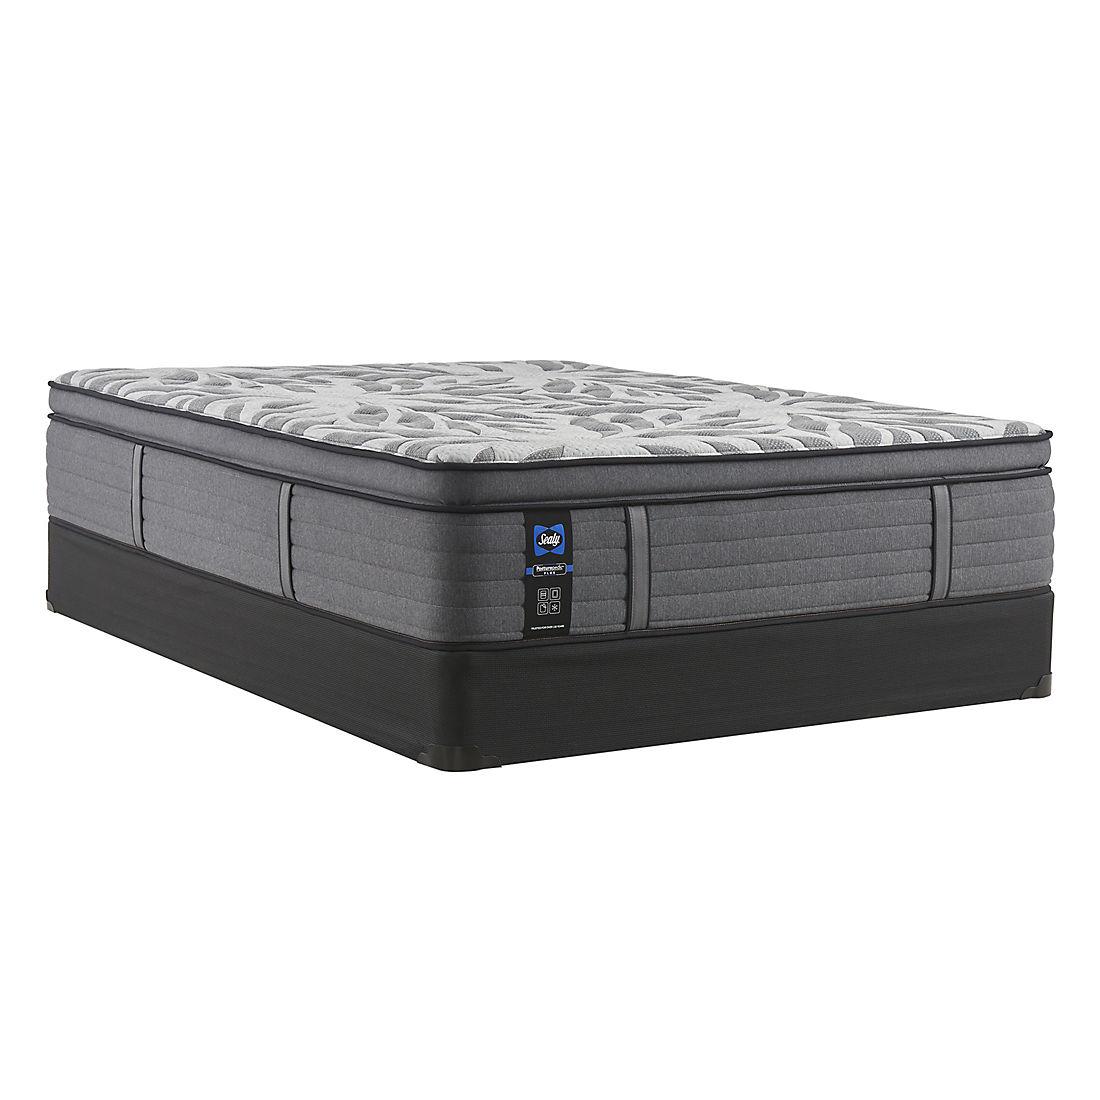 Sealy Posturepedic Plus Cushion Firm, King Bed And Mattress Set